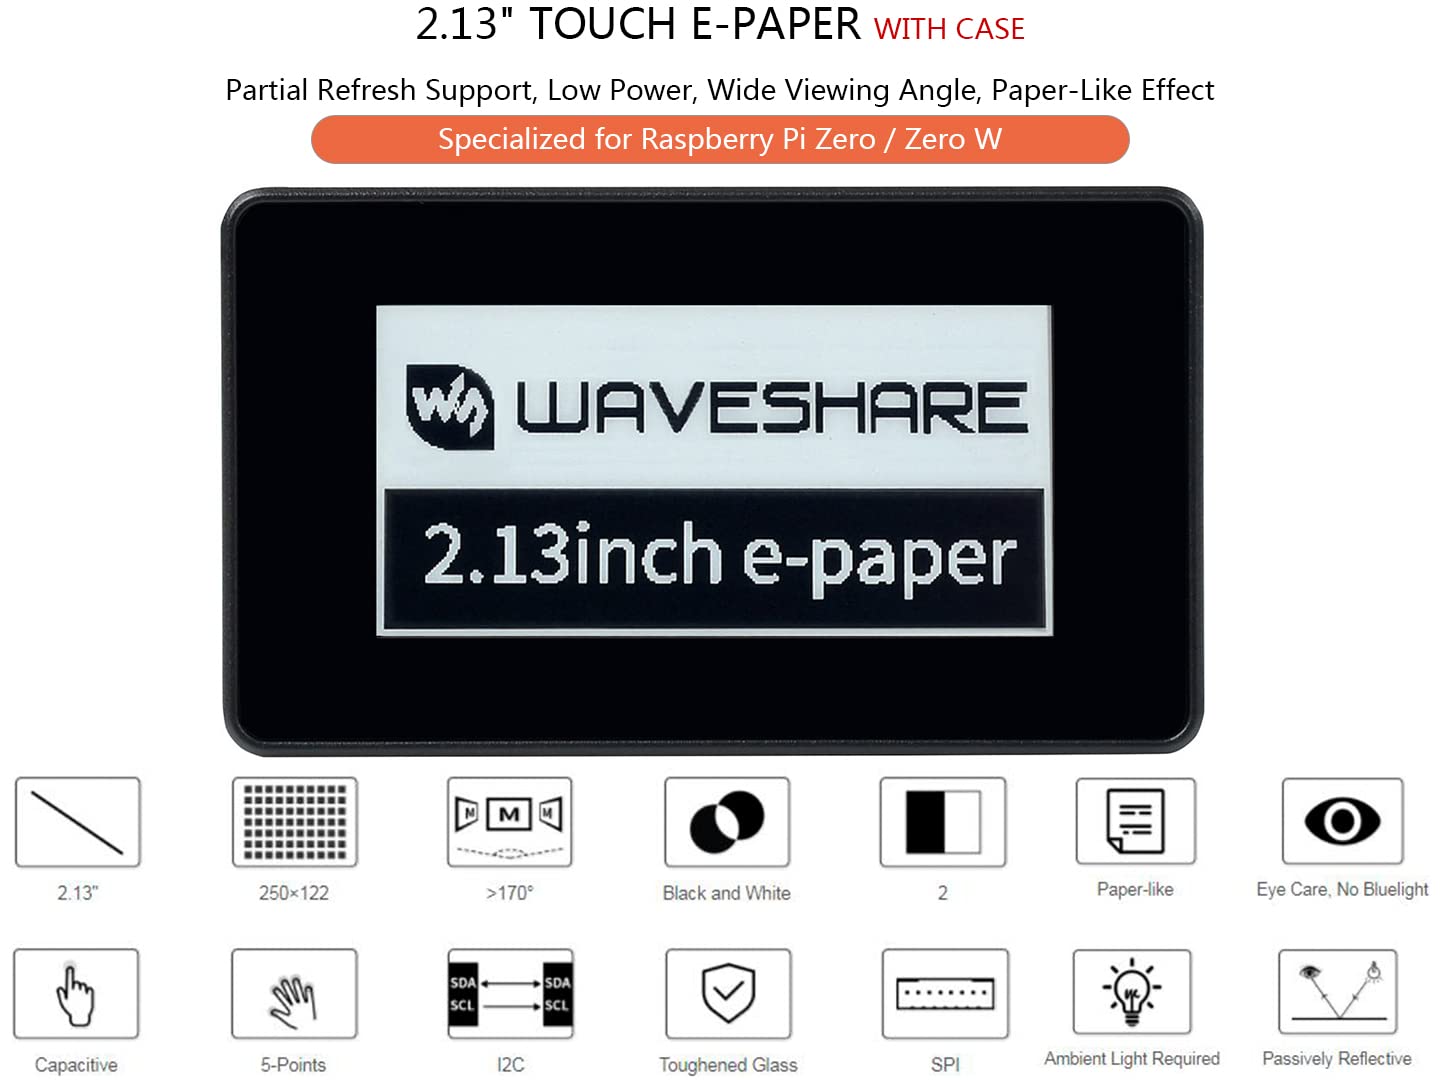 waveshare 2.13inch Touch e-Paper Display with ABS Case, 250x122 Pixels E-Ink Display for Raspberry Pi Zero/Raspberry Pi Zero W/Pi Zero WH, Support Partial Refresh